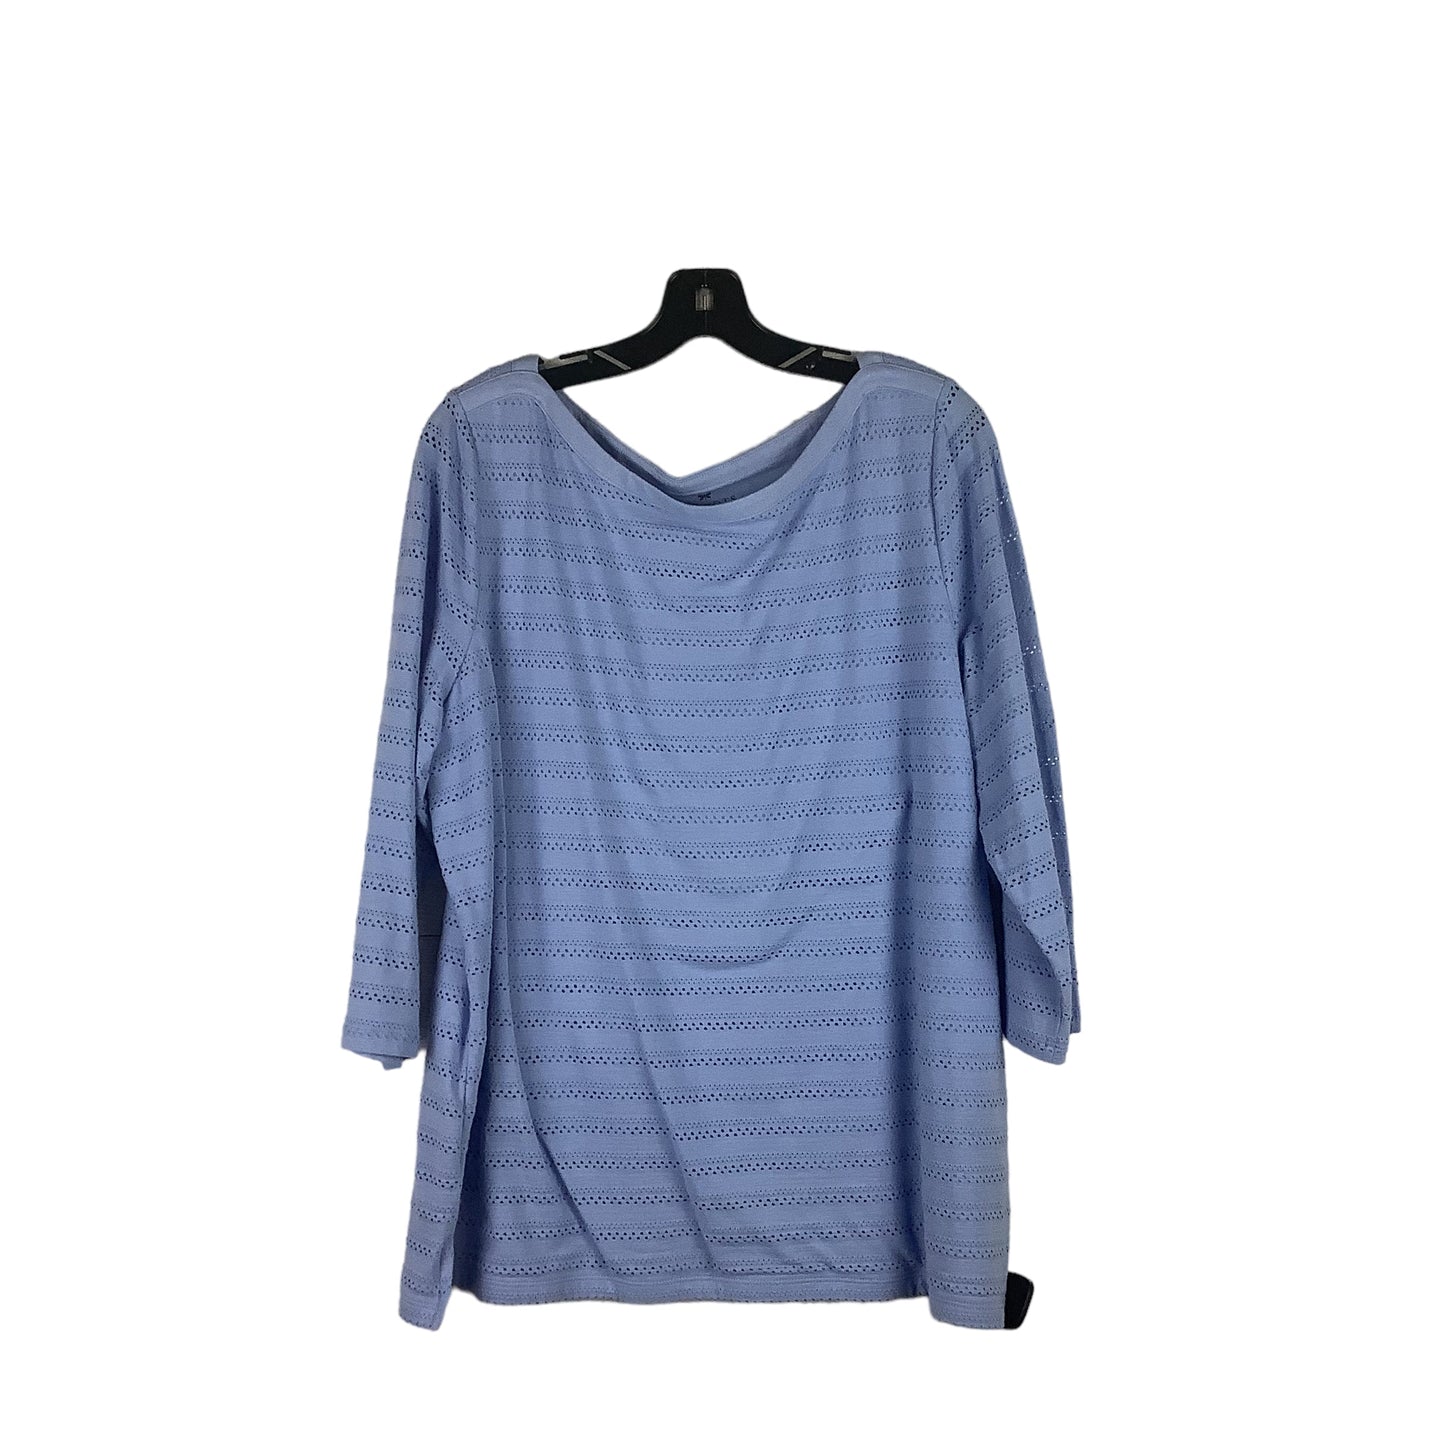 Top Long Sleeve By Talbots  Size: 1x